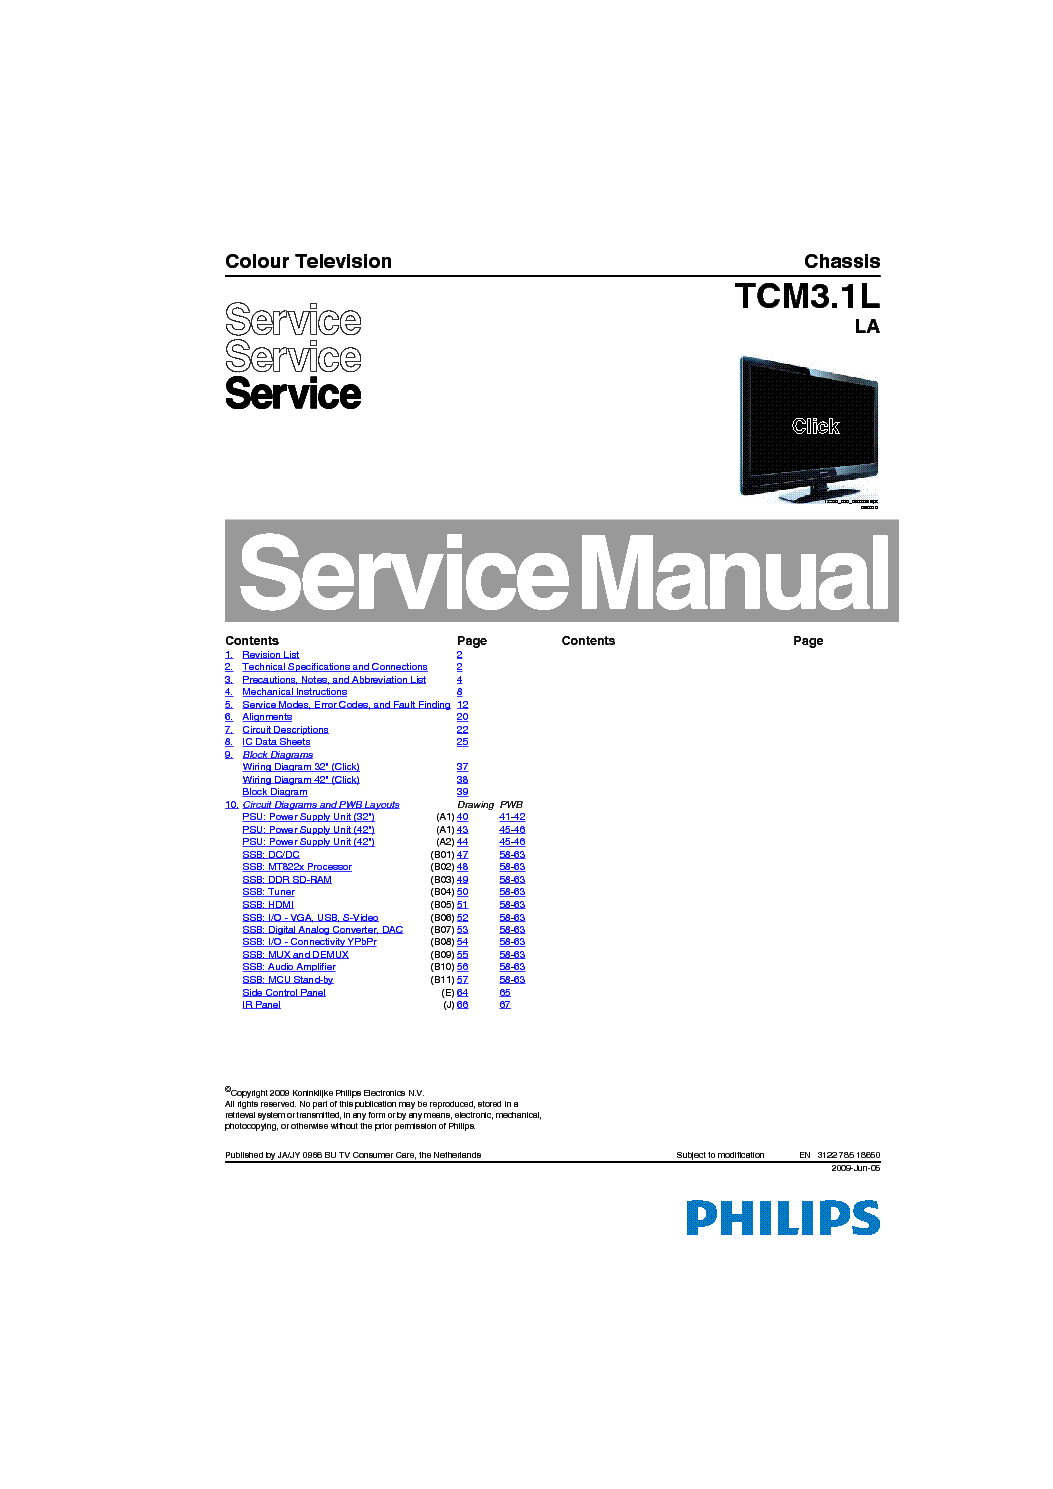 PHILIPS 42PFL3604 CHASSIS TCM3.1LLA service manual (1st page)